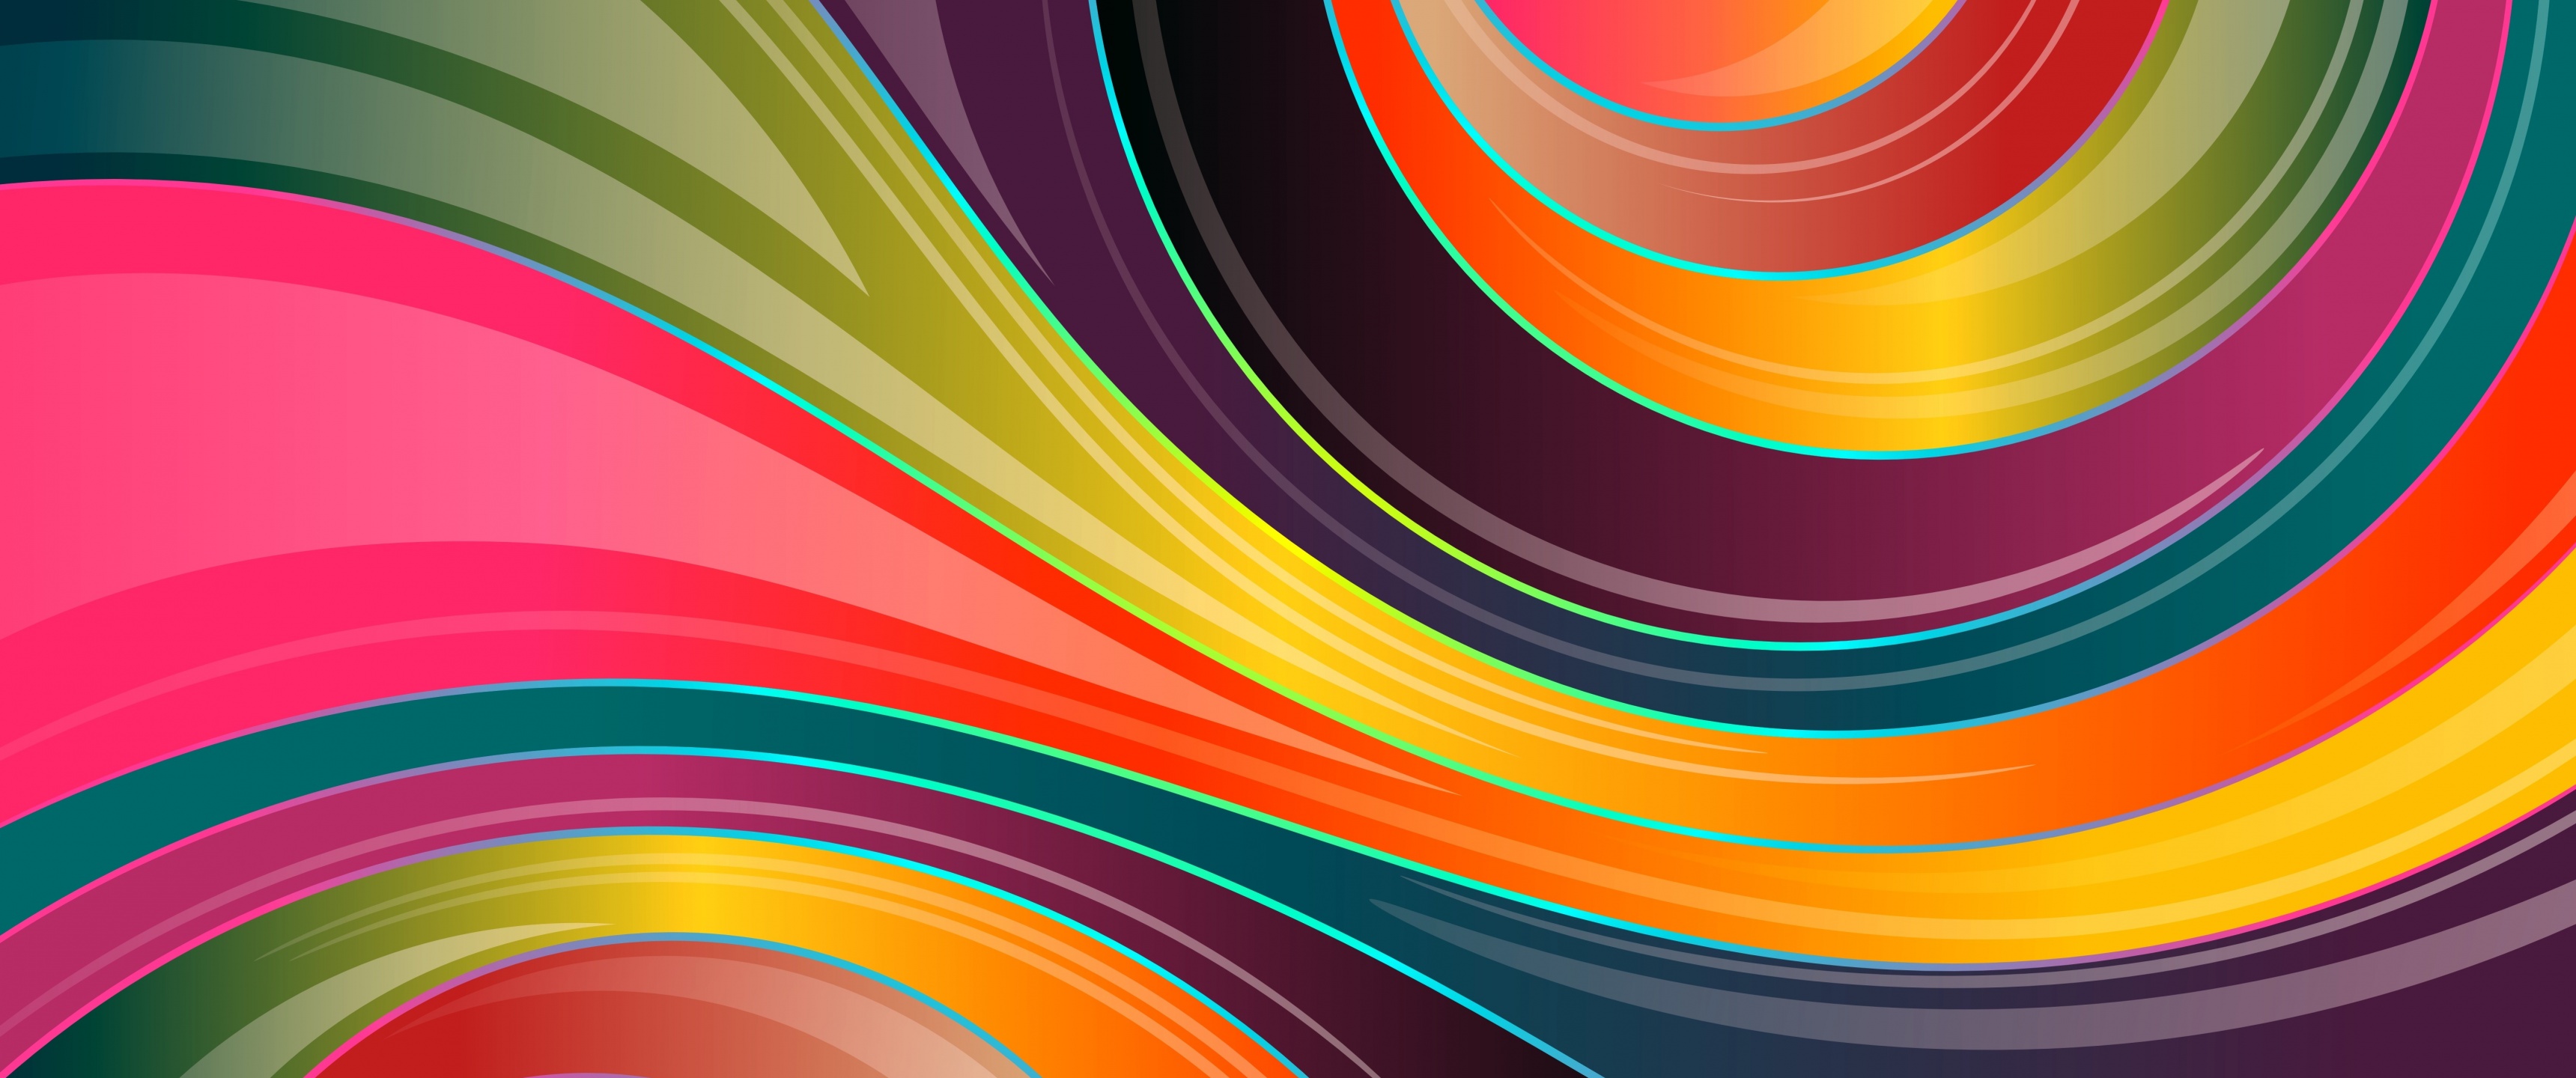 Colorful background Wallpaper 4K, Waves, Lines, Glossy, Abstract, #5687